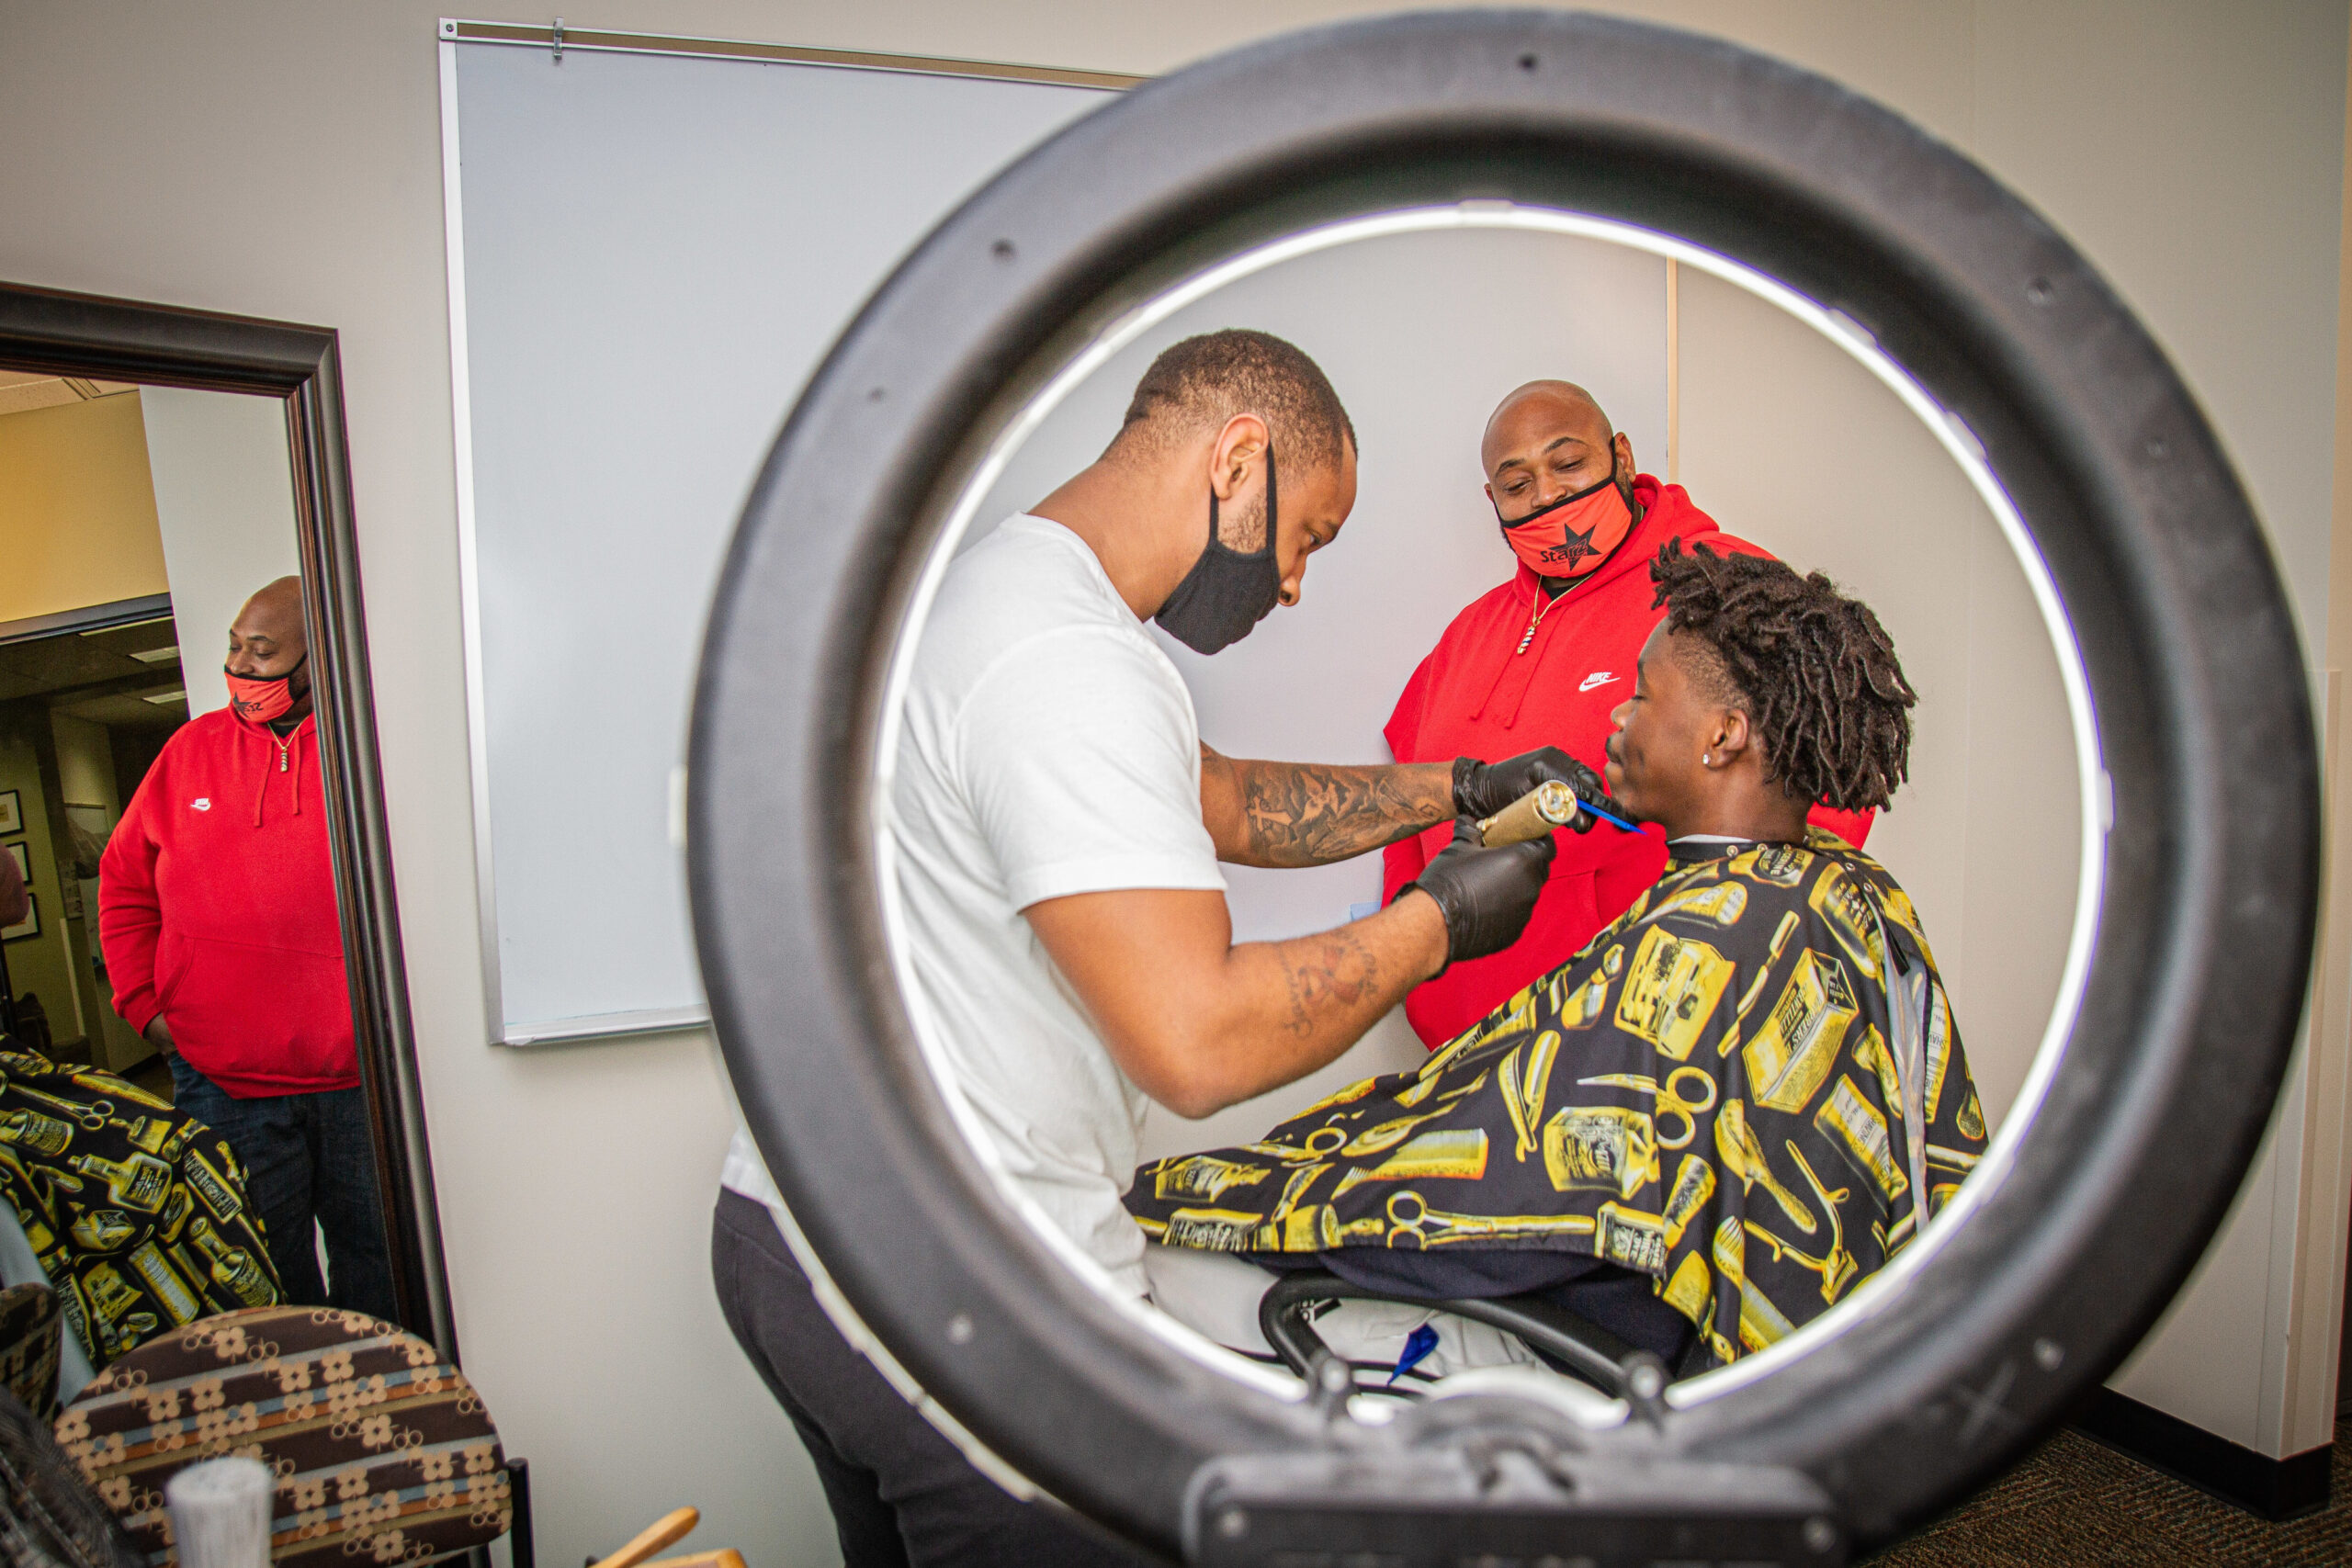 Chris Kimbrough watches his son cut the hair of a college student